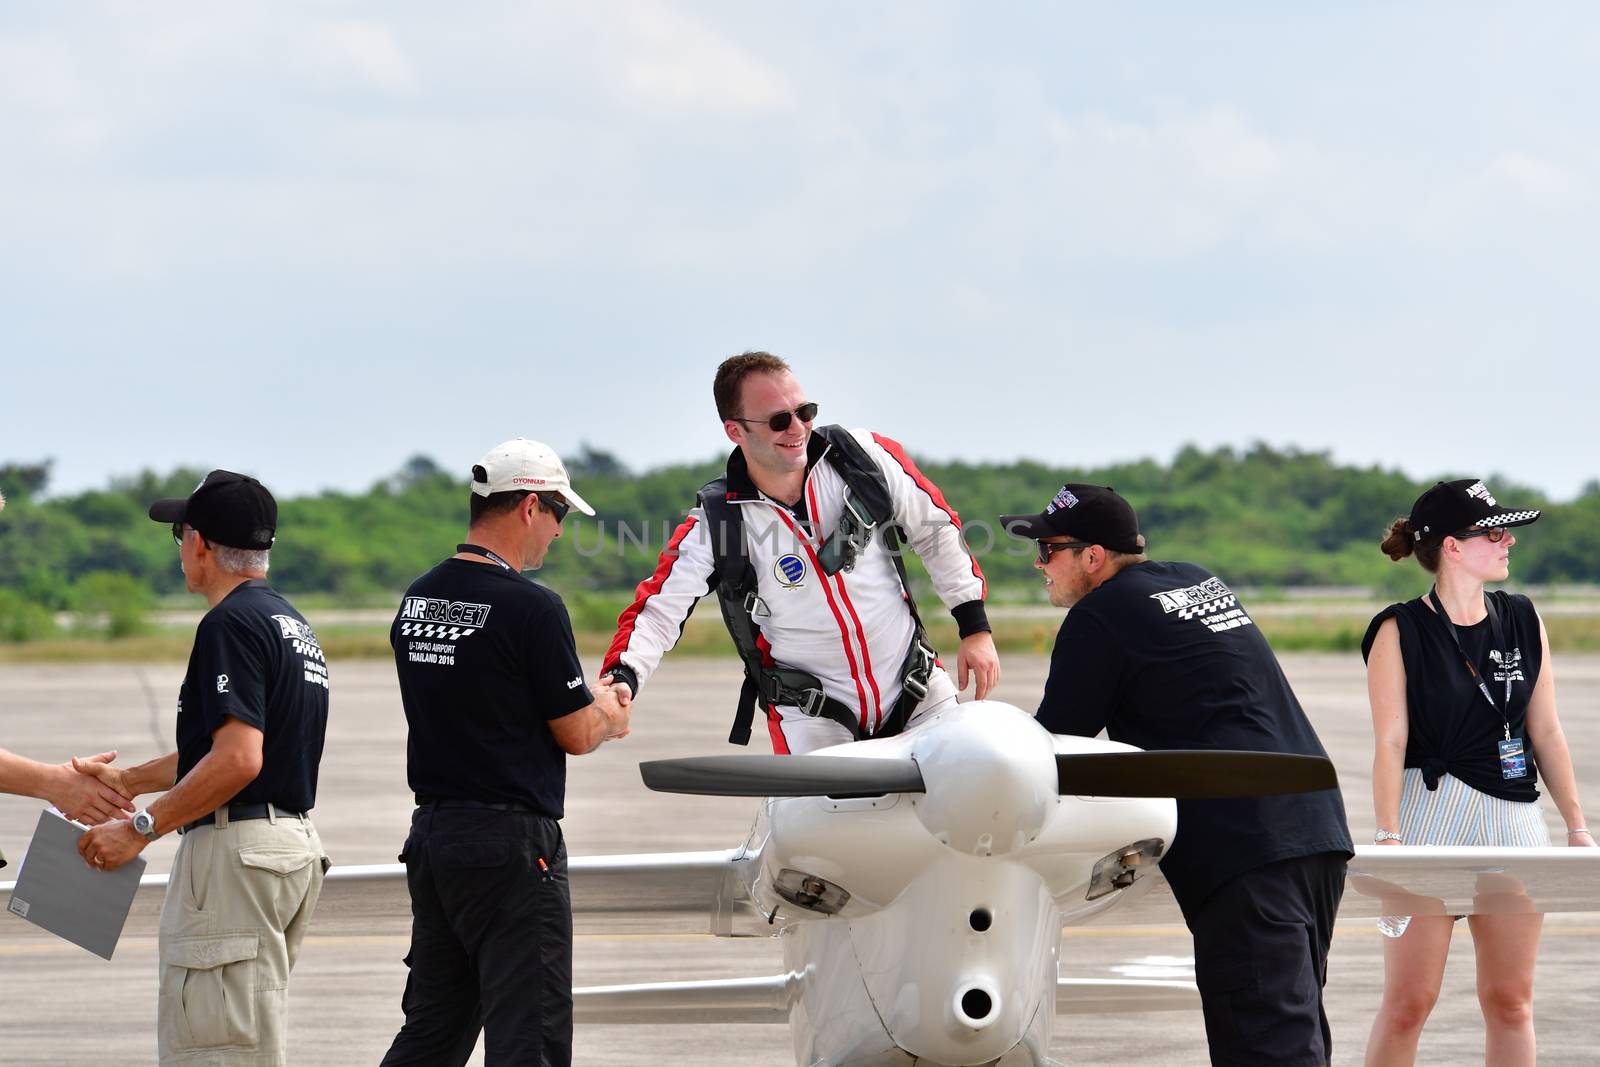 CHONBURI - NOVEMBER 20 : Stanislas Damiron pilot of France with Western Air Racing aircraft in Air Race 1 Thailand at U-Tapao International Airport on November 20, 2016 in Chonburi, Thailand.